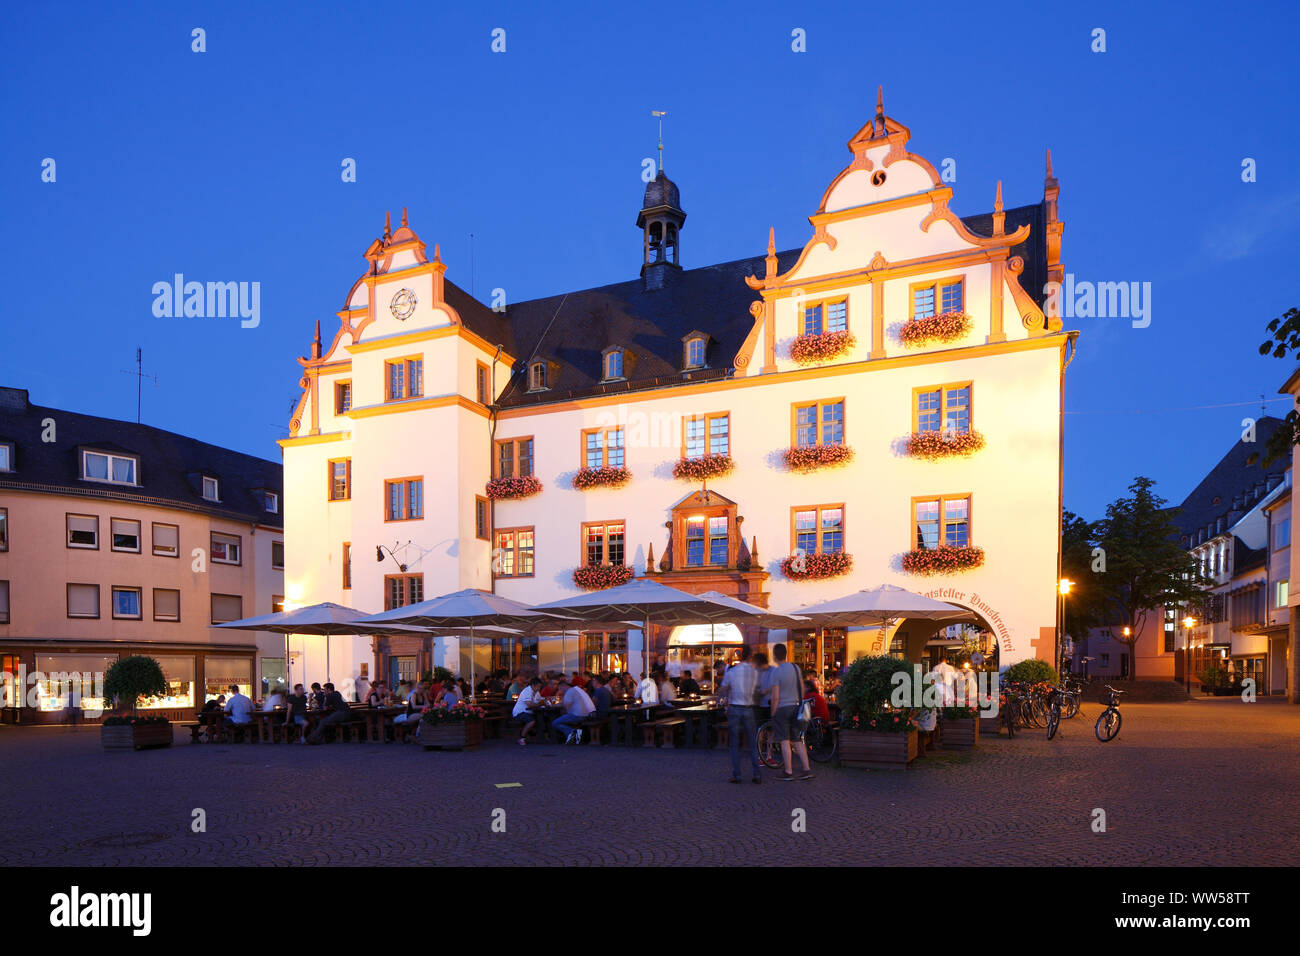 old city hall on the market square at dusk, Darmstadt, Hesse, Germany, Europe Stock Photo